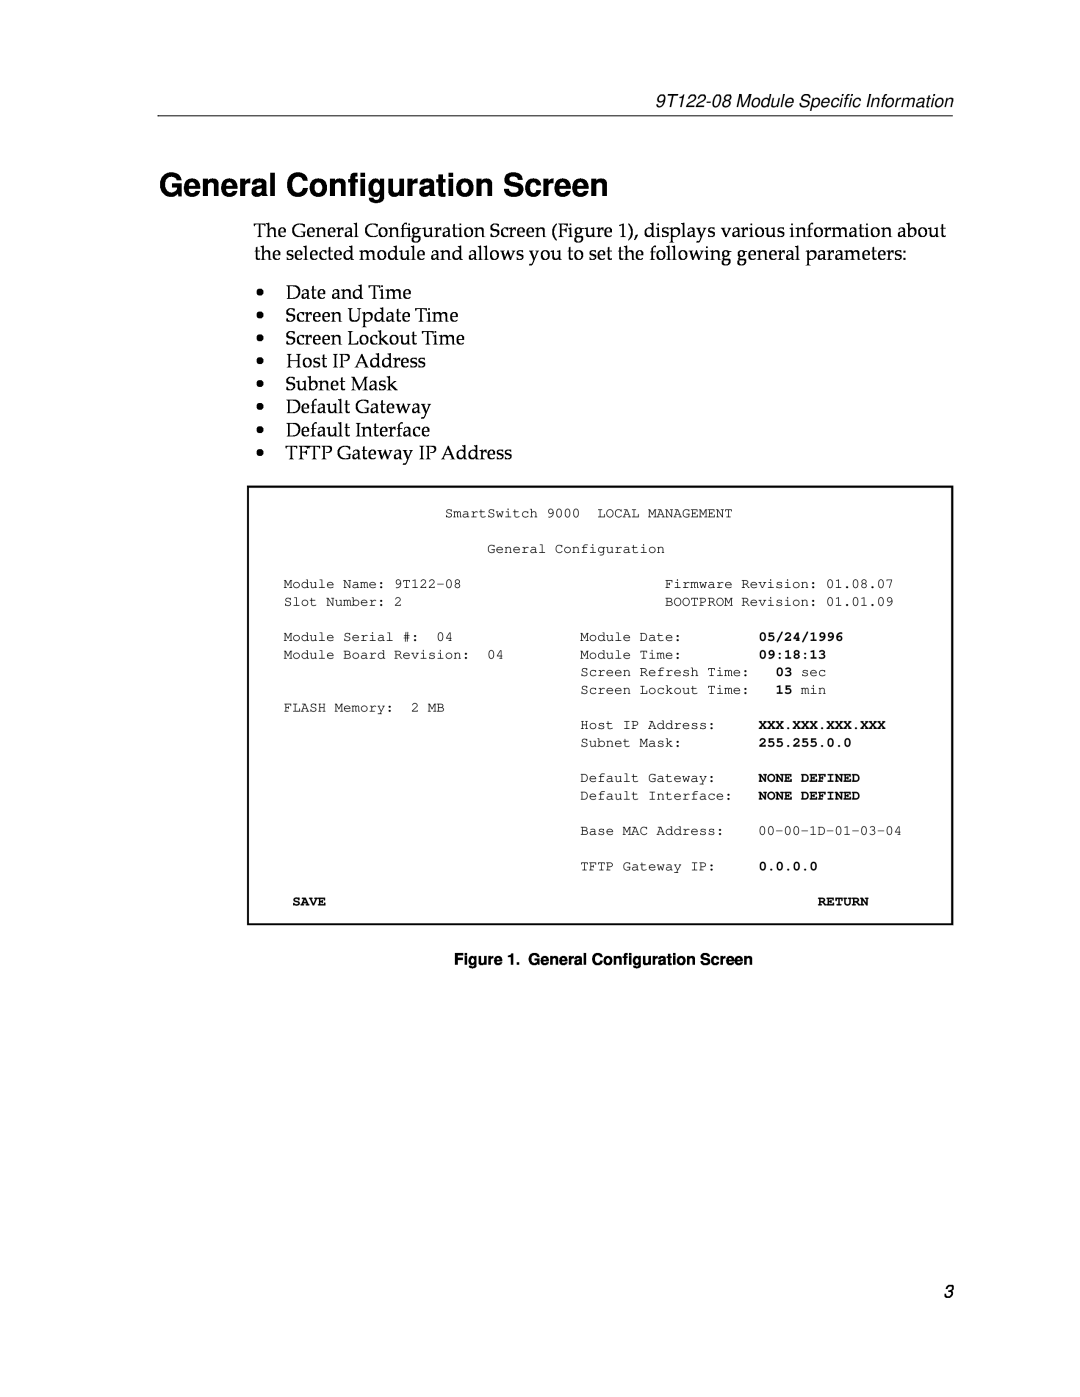 Cabletron Systems 9T122-08 appendix General Conﬁguration Screen 